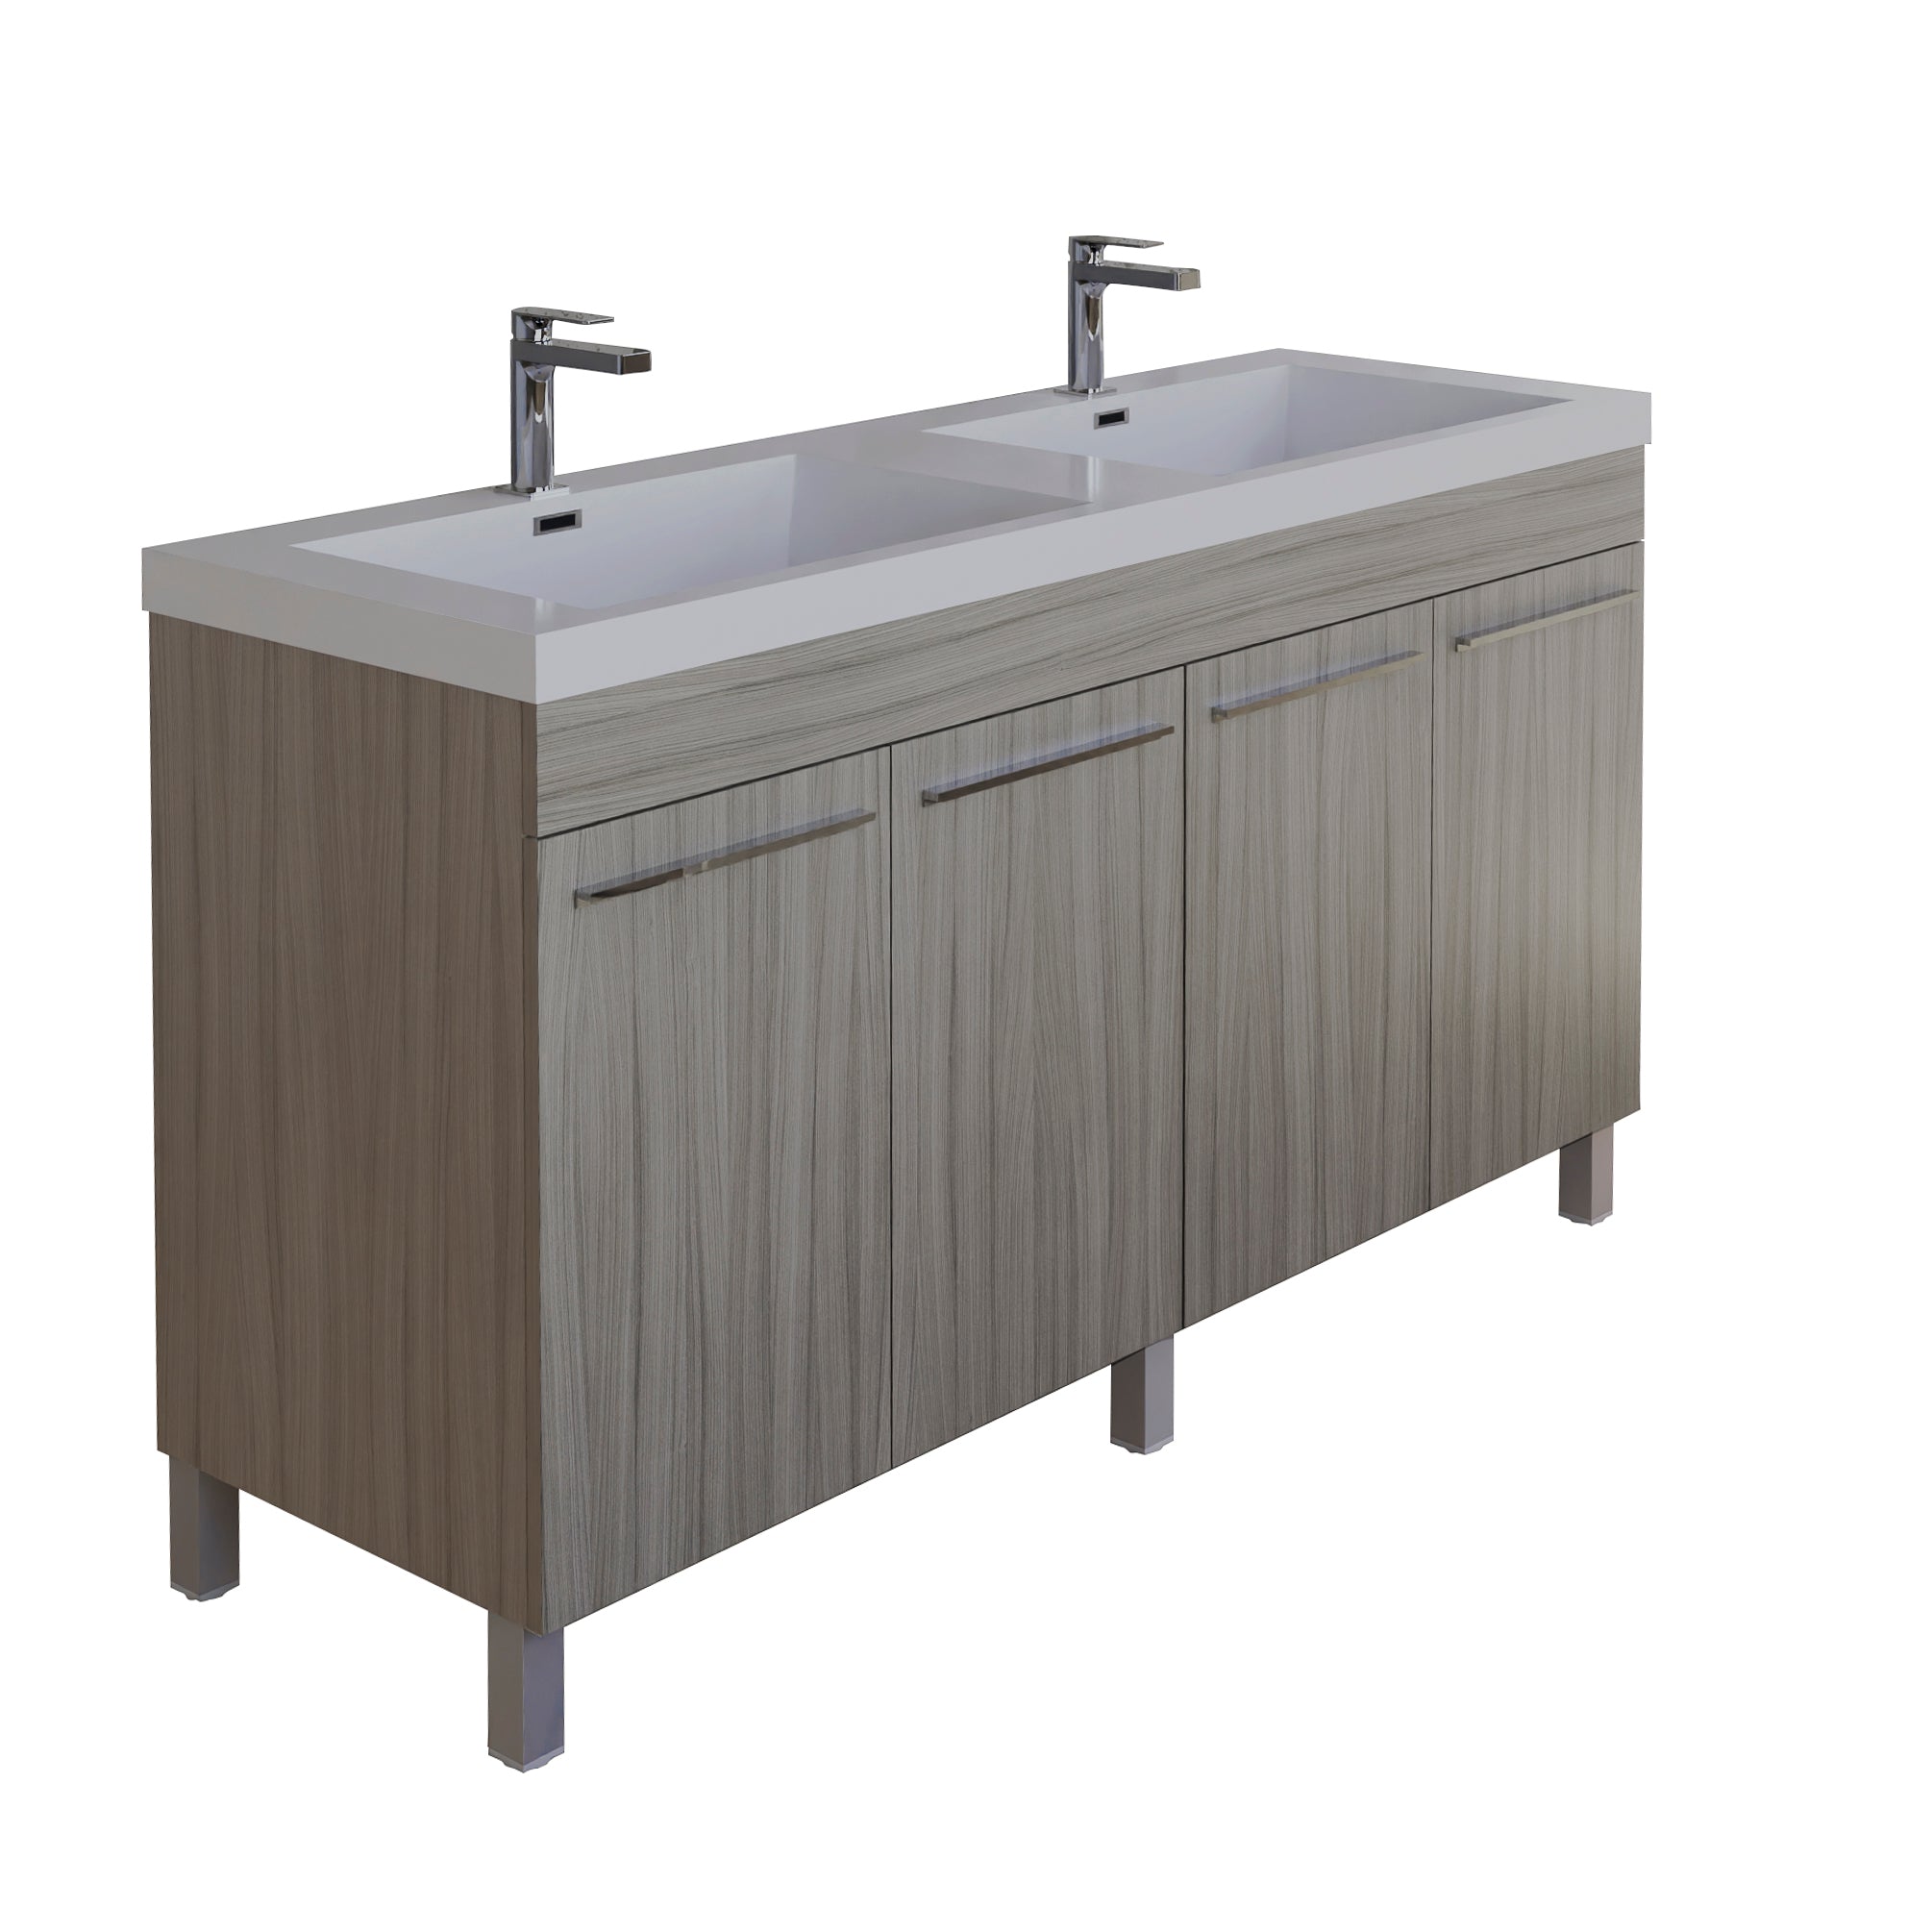 Ocean 59 Nilo Grey Wood Texture Cabinet, Square Cultured Marble Sink, Free Standing Vanity Set